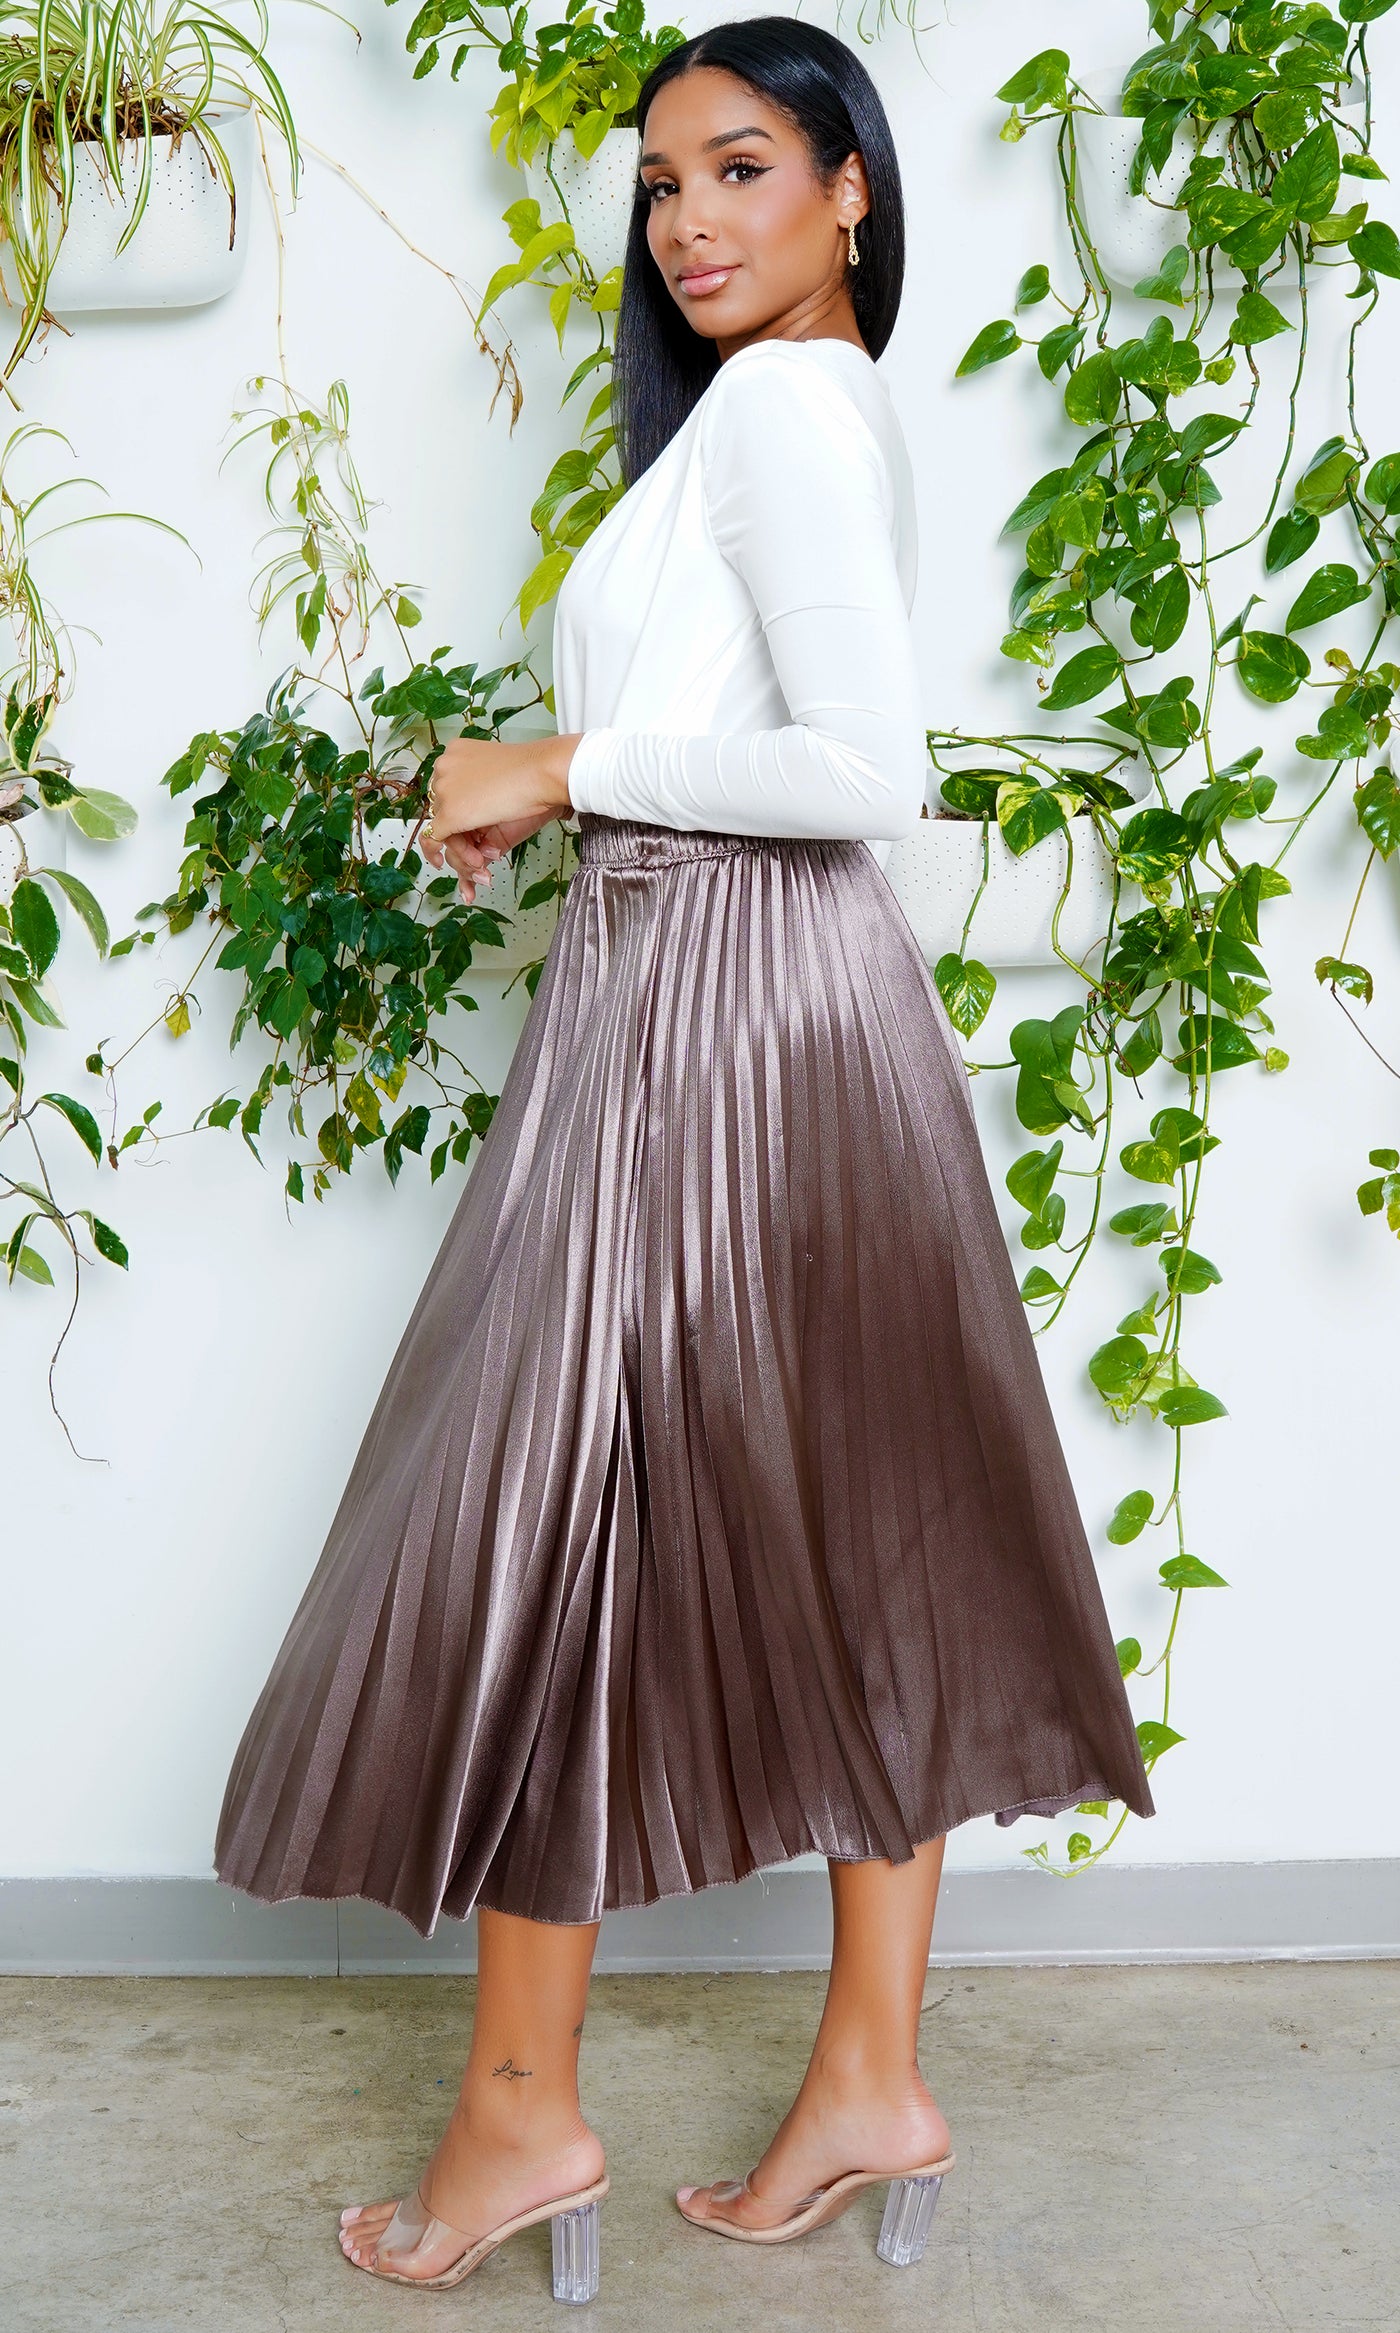 The "Step it up" Metallic Pleated Skirt - Cutely Covered